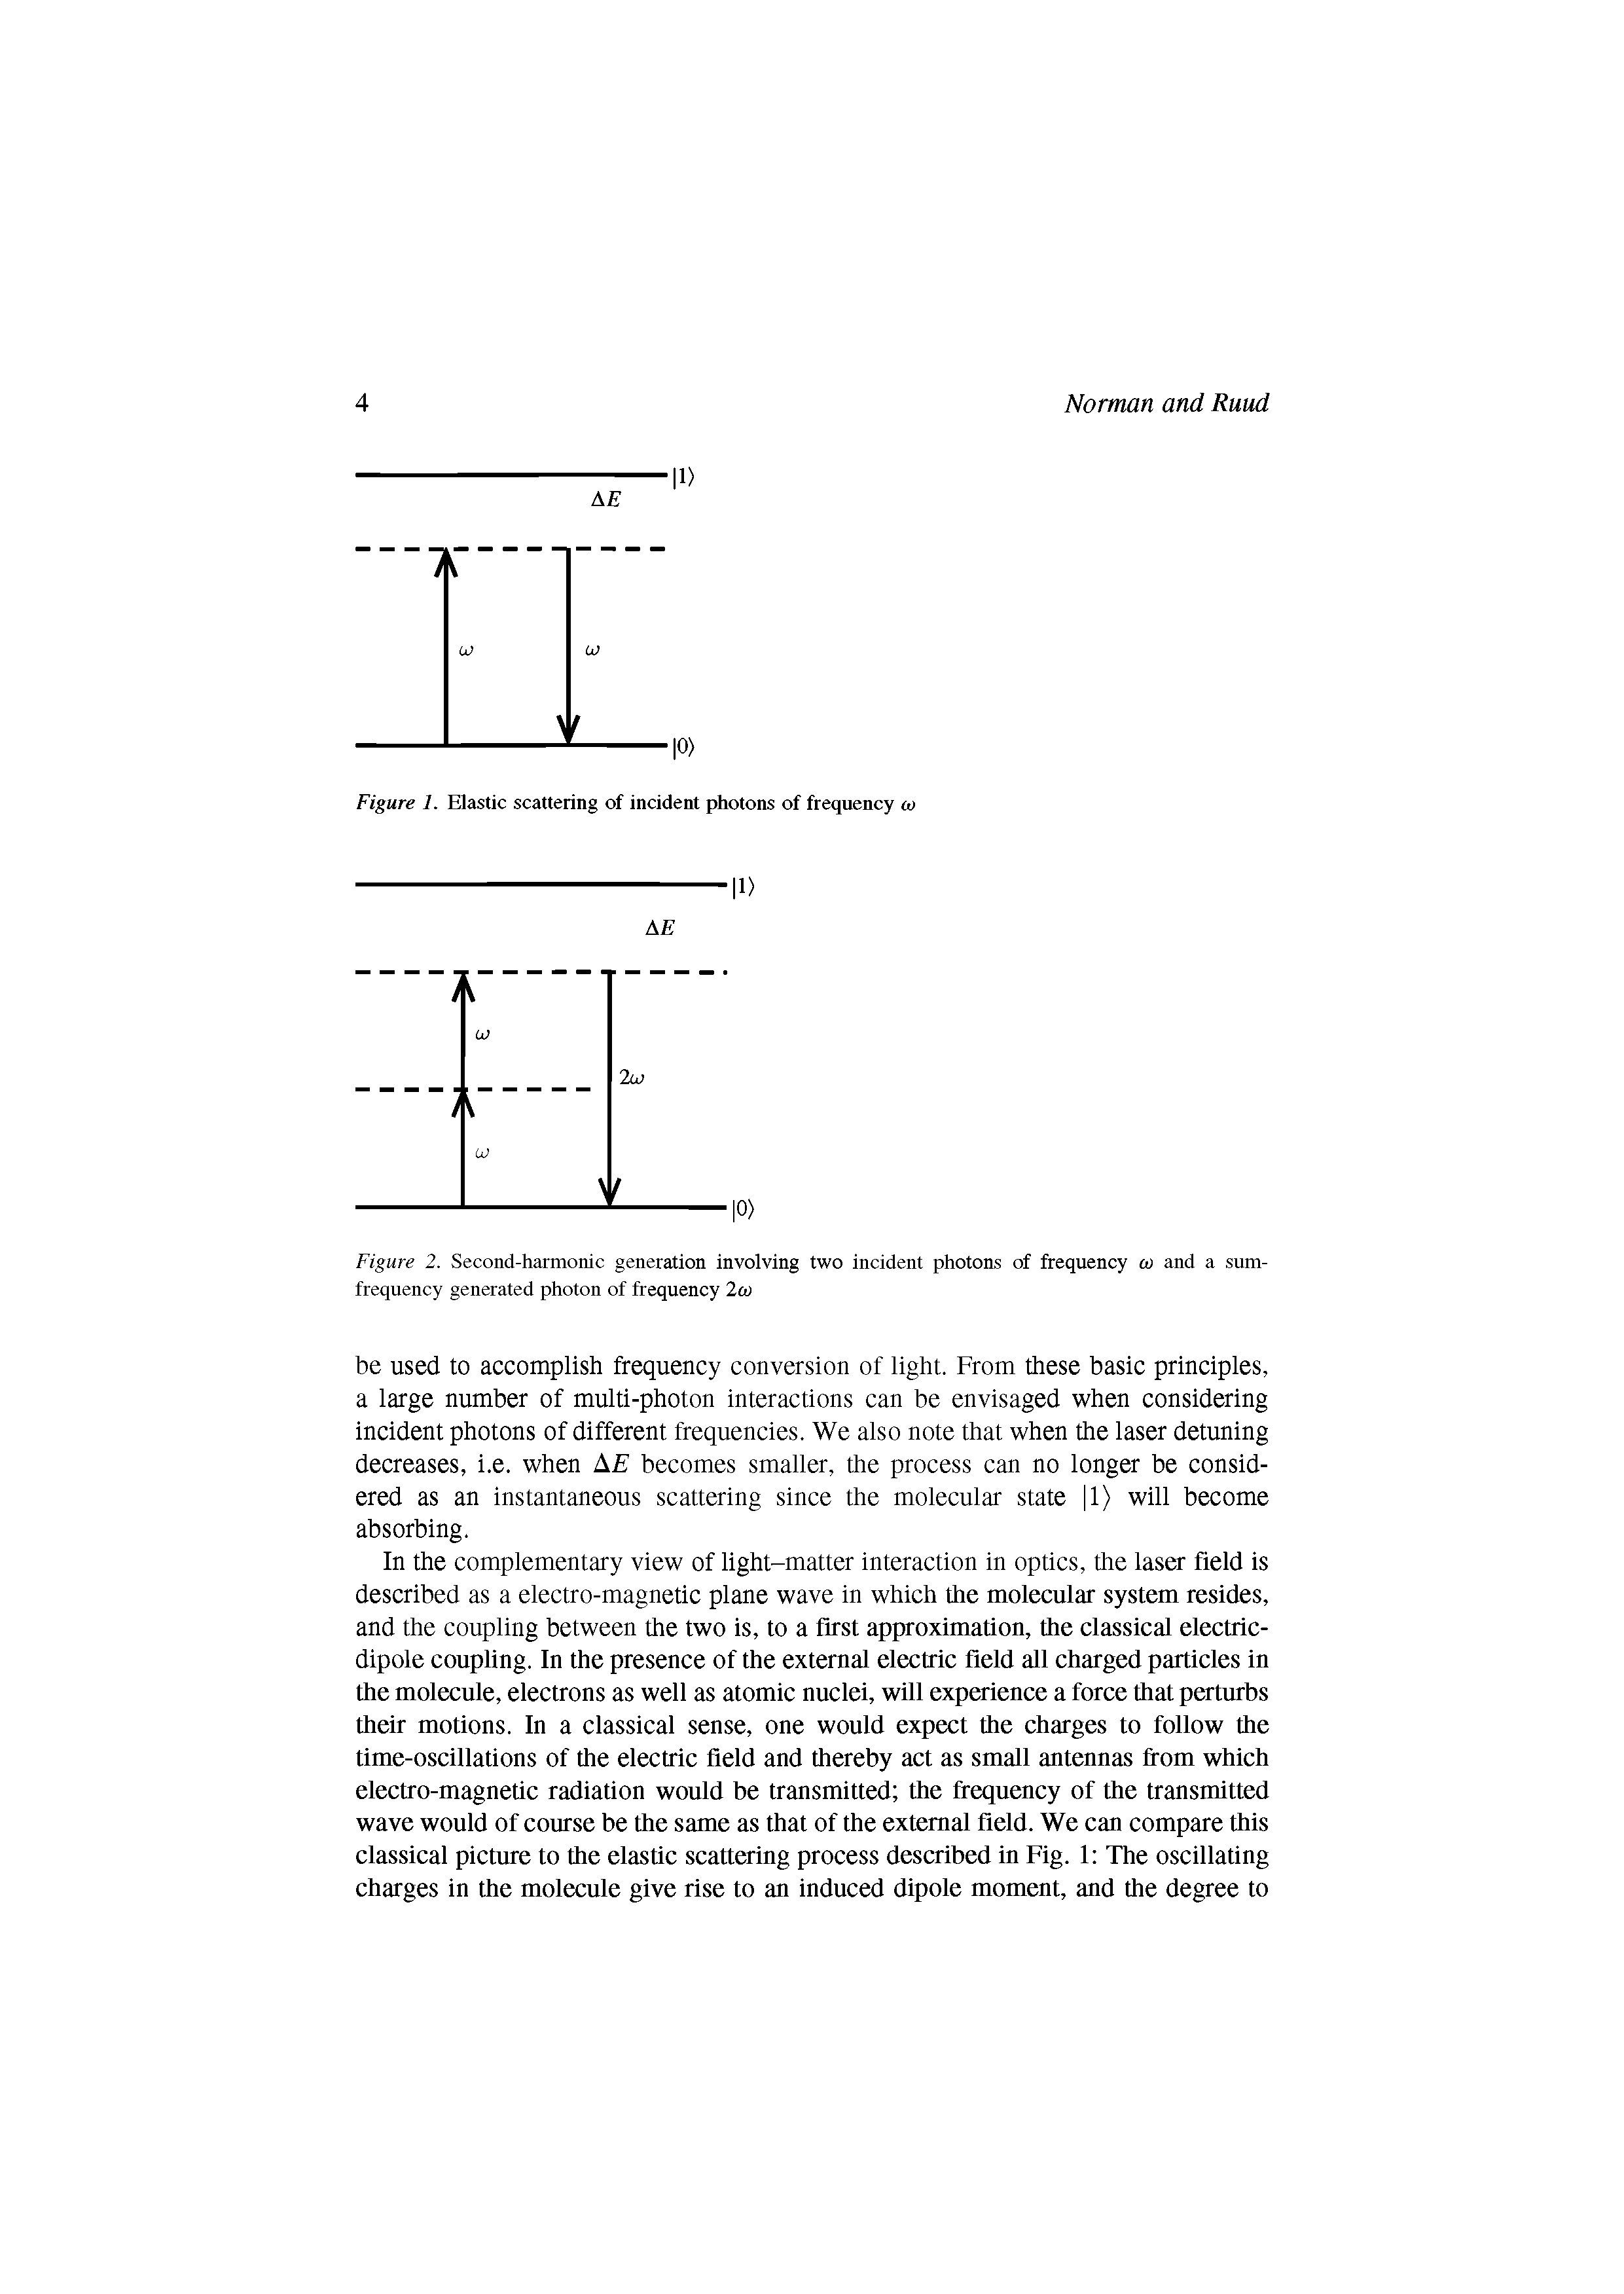 Figure 2. Second-harmonic generation involving two incident photons of frequency u) and a sum-frequency generated photon of frequency 2w...